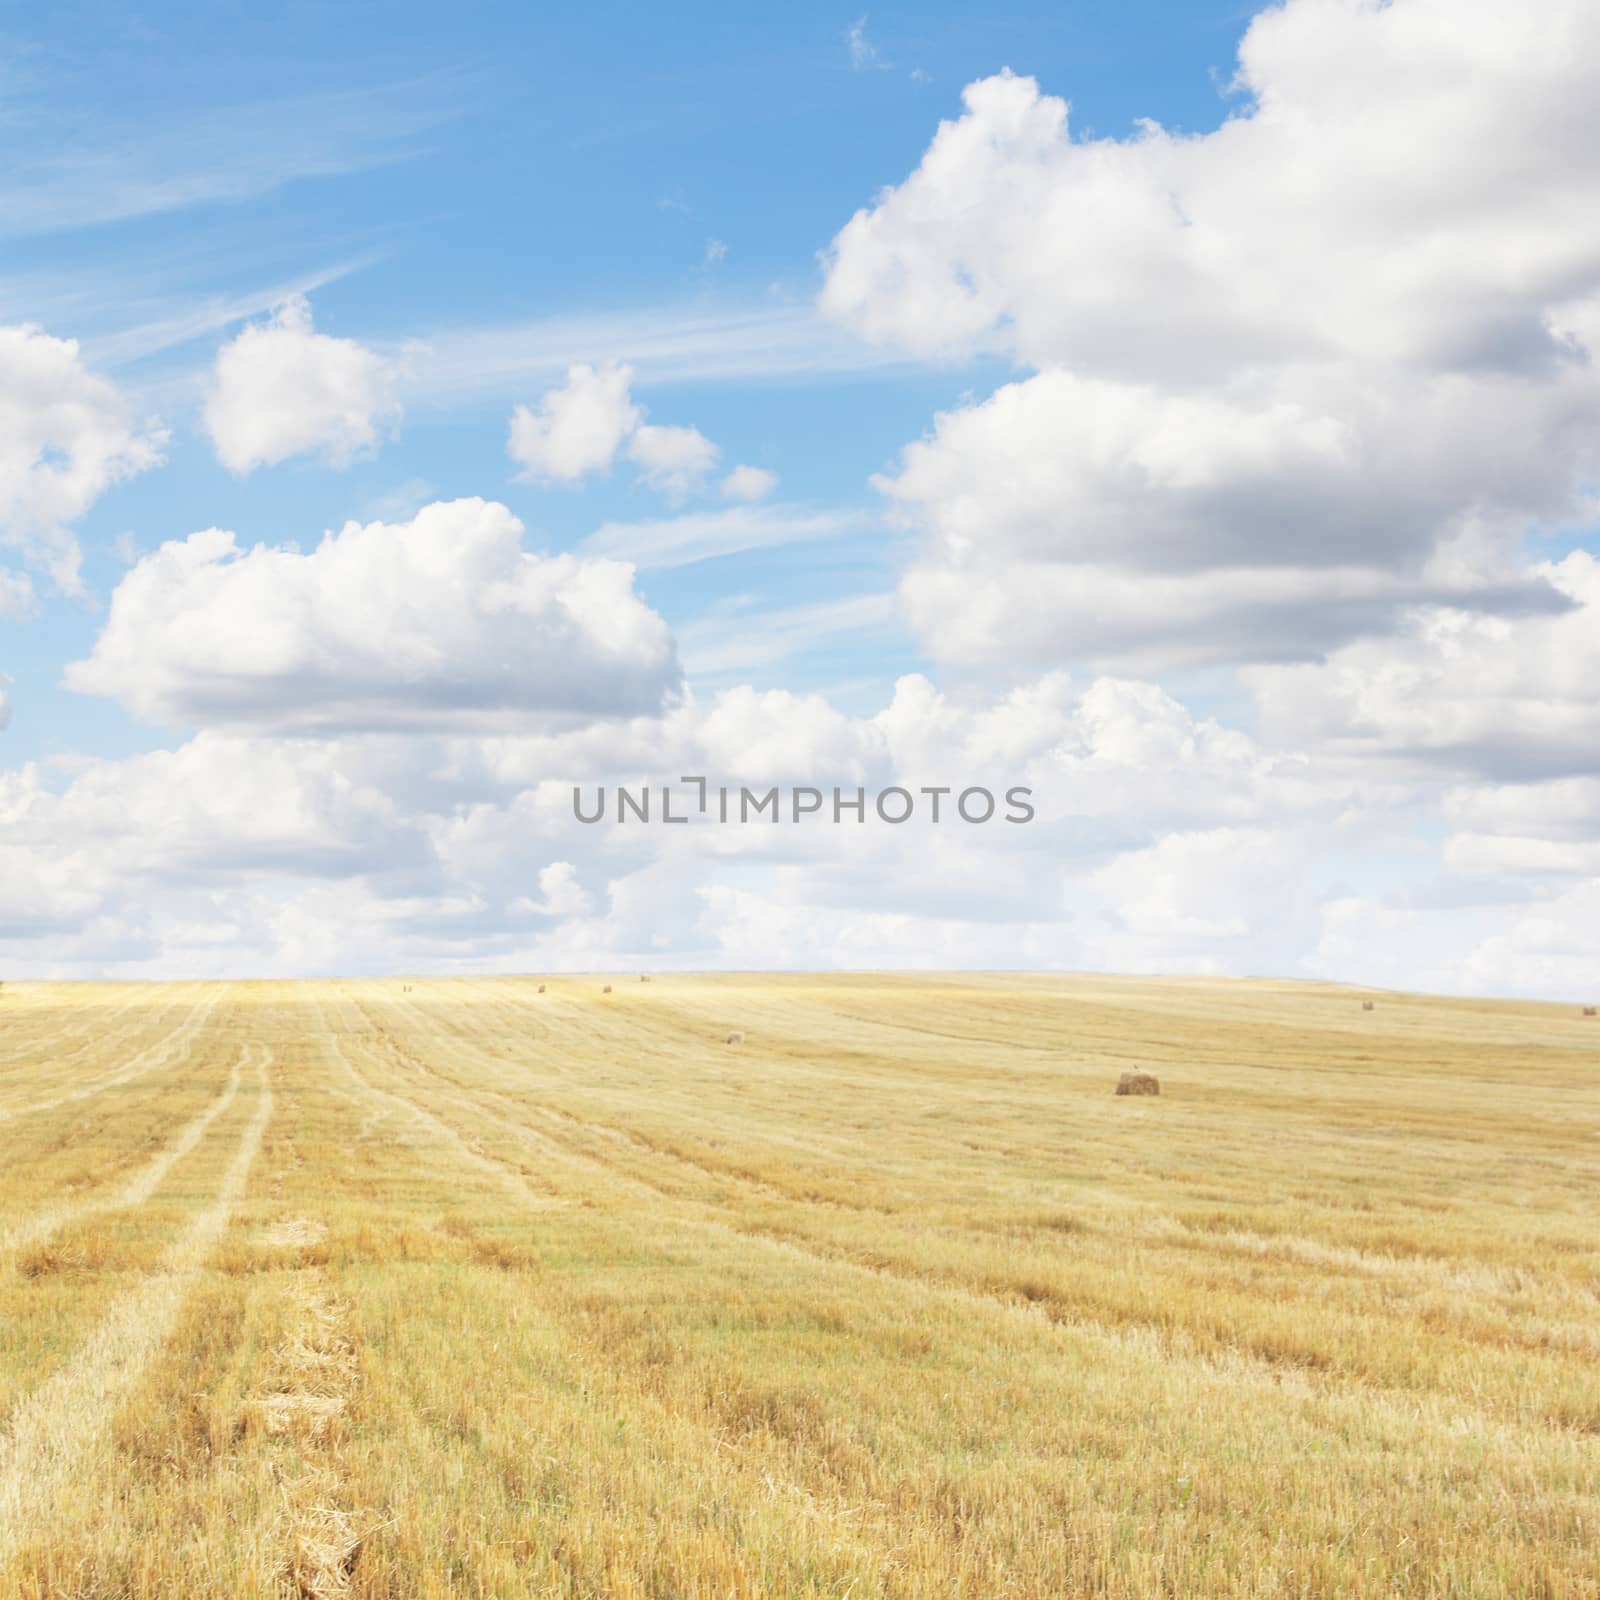 Wheat field after harvesting under blue cloudy sky